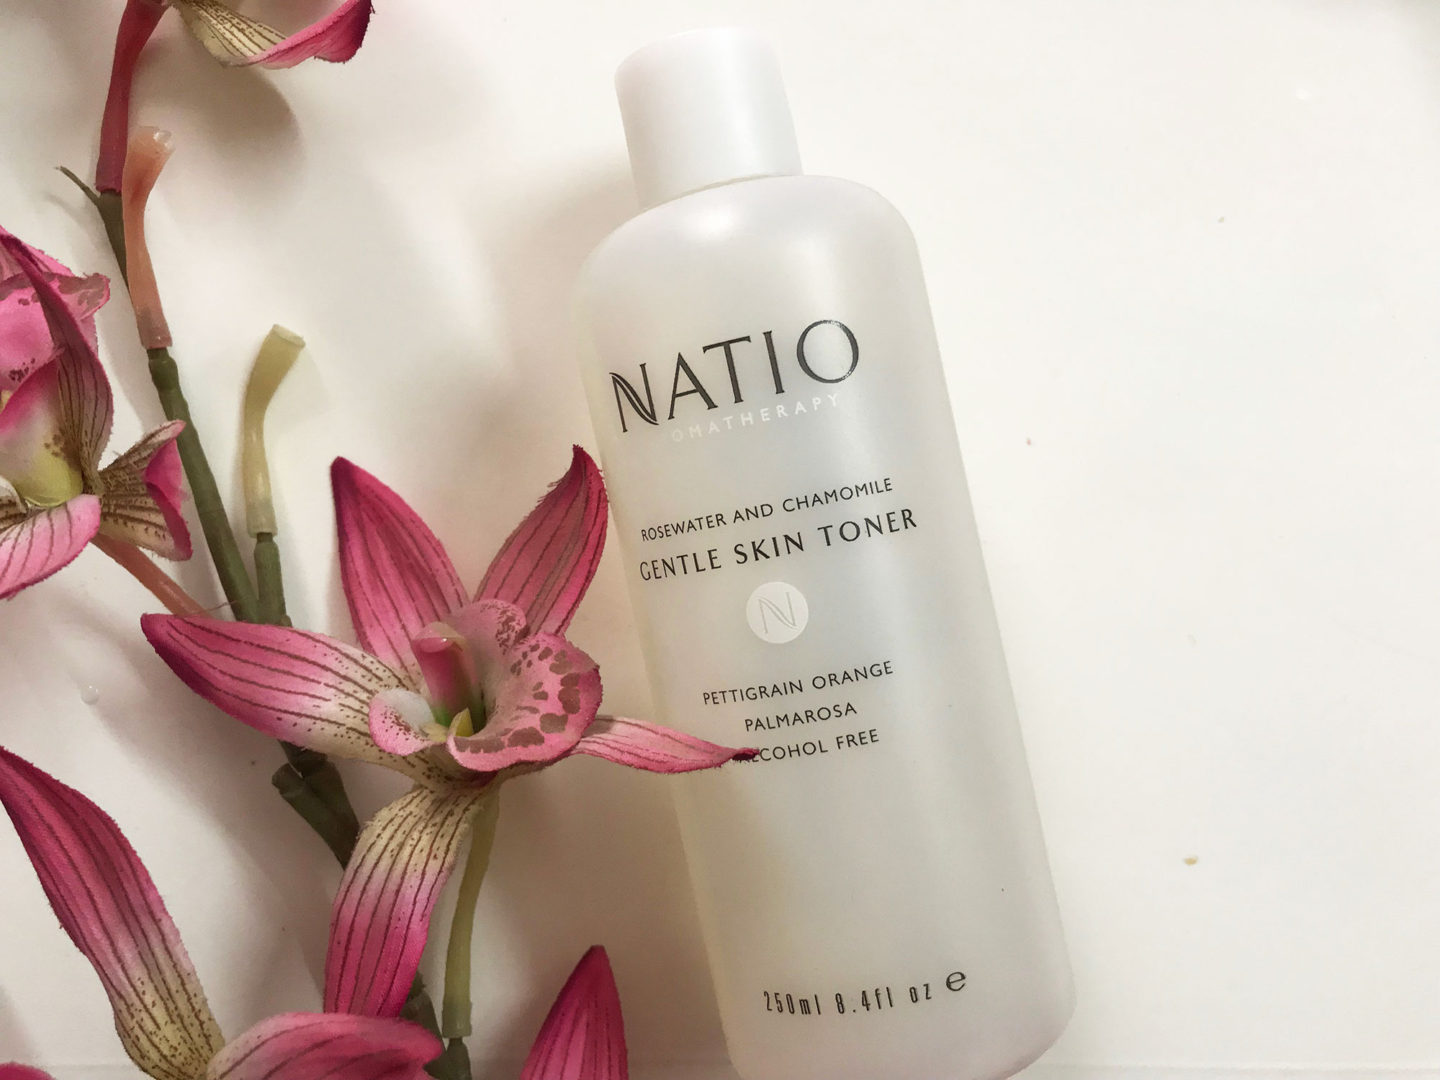 Natio aromatherapy rosewater & chamomile gentle skin toner Review